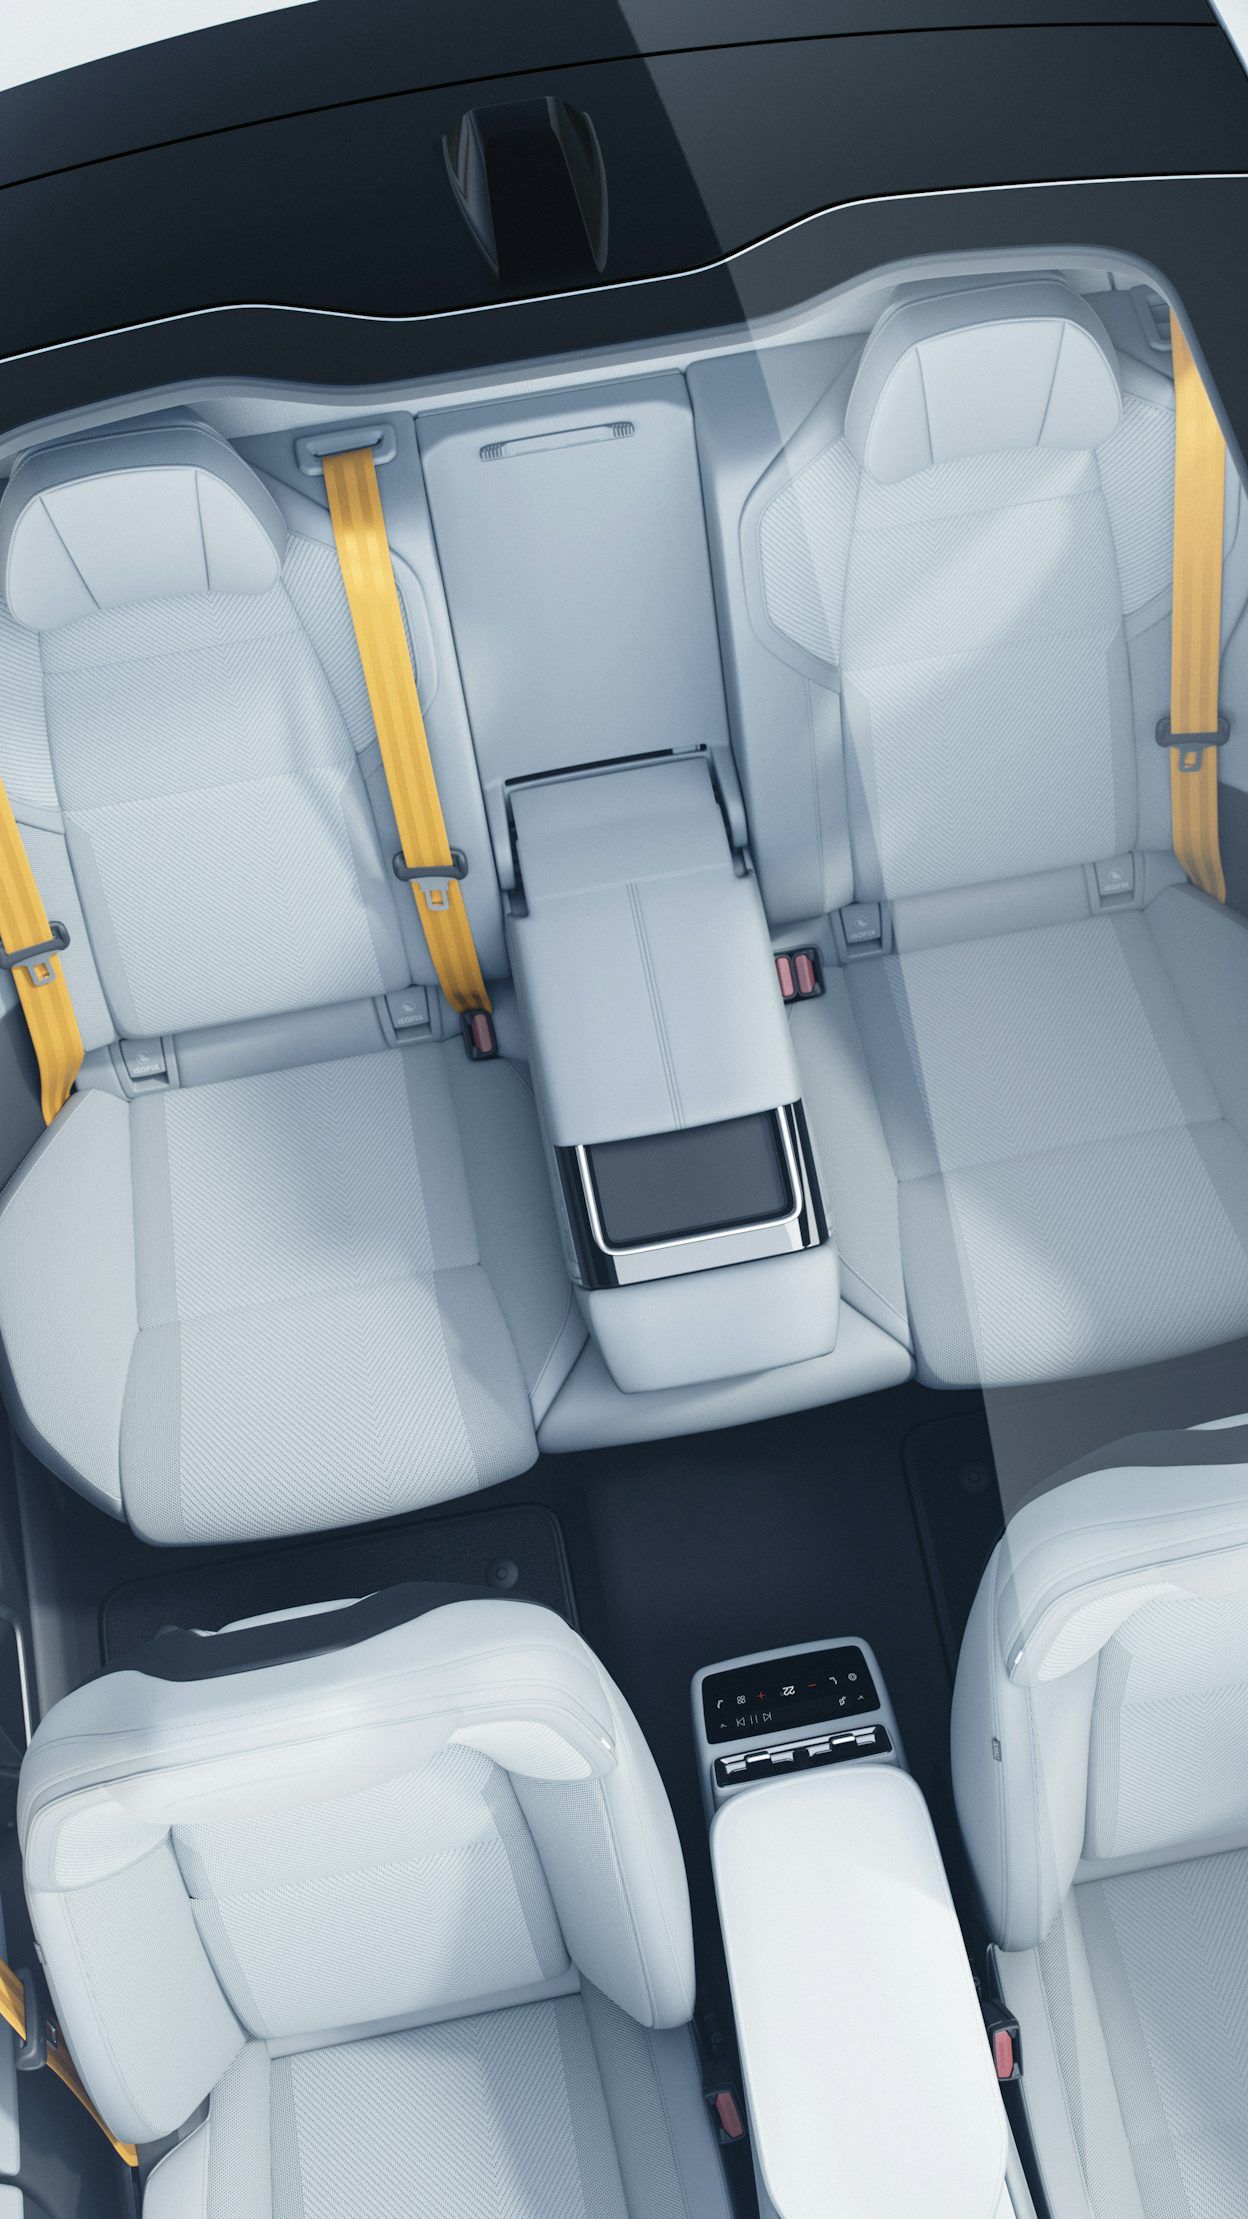 The interior of Polestar 4 shown from above